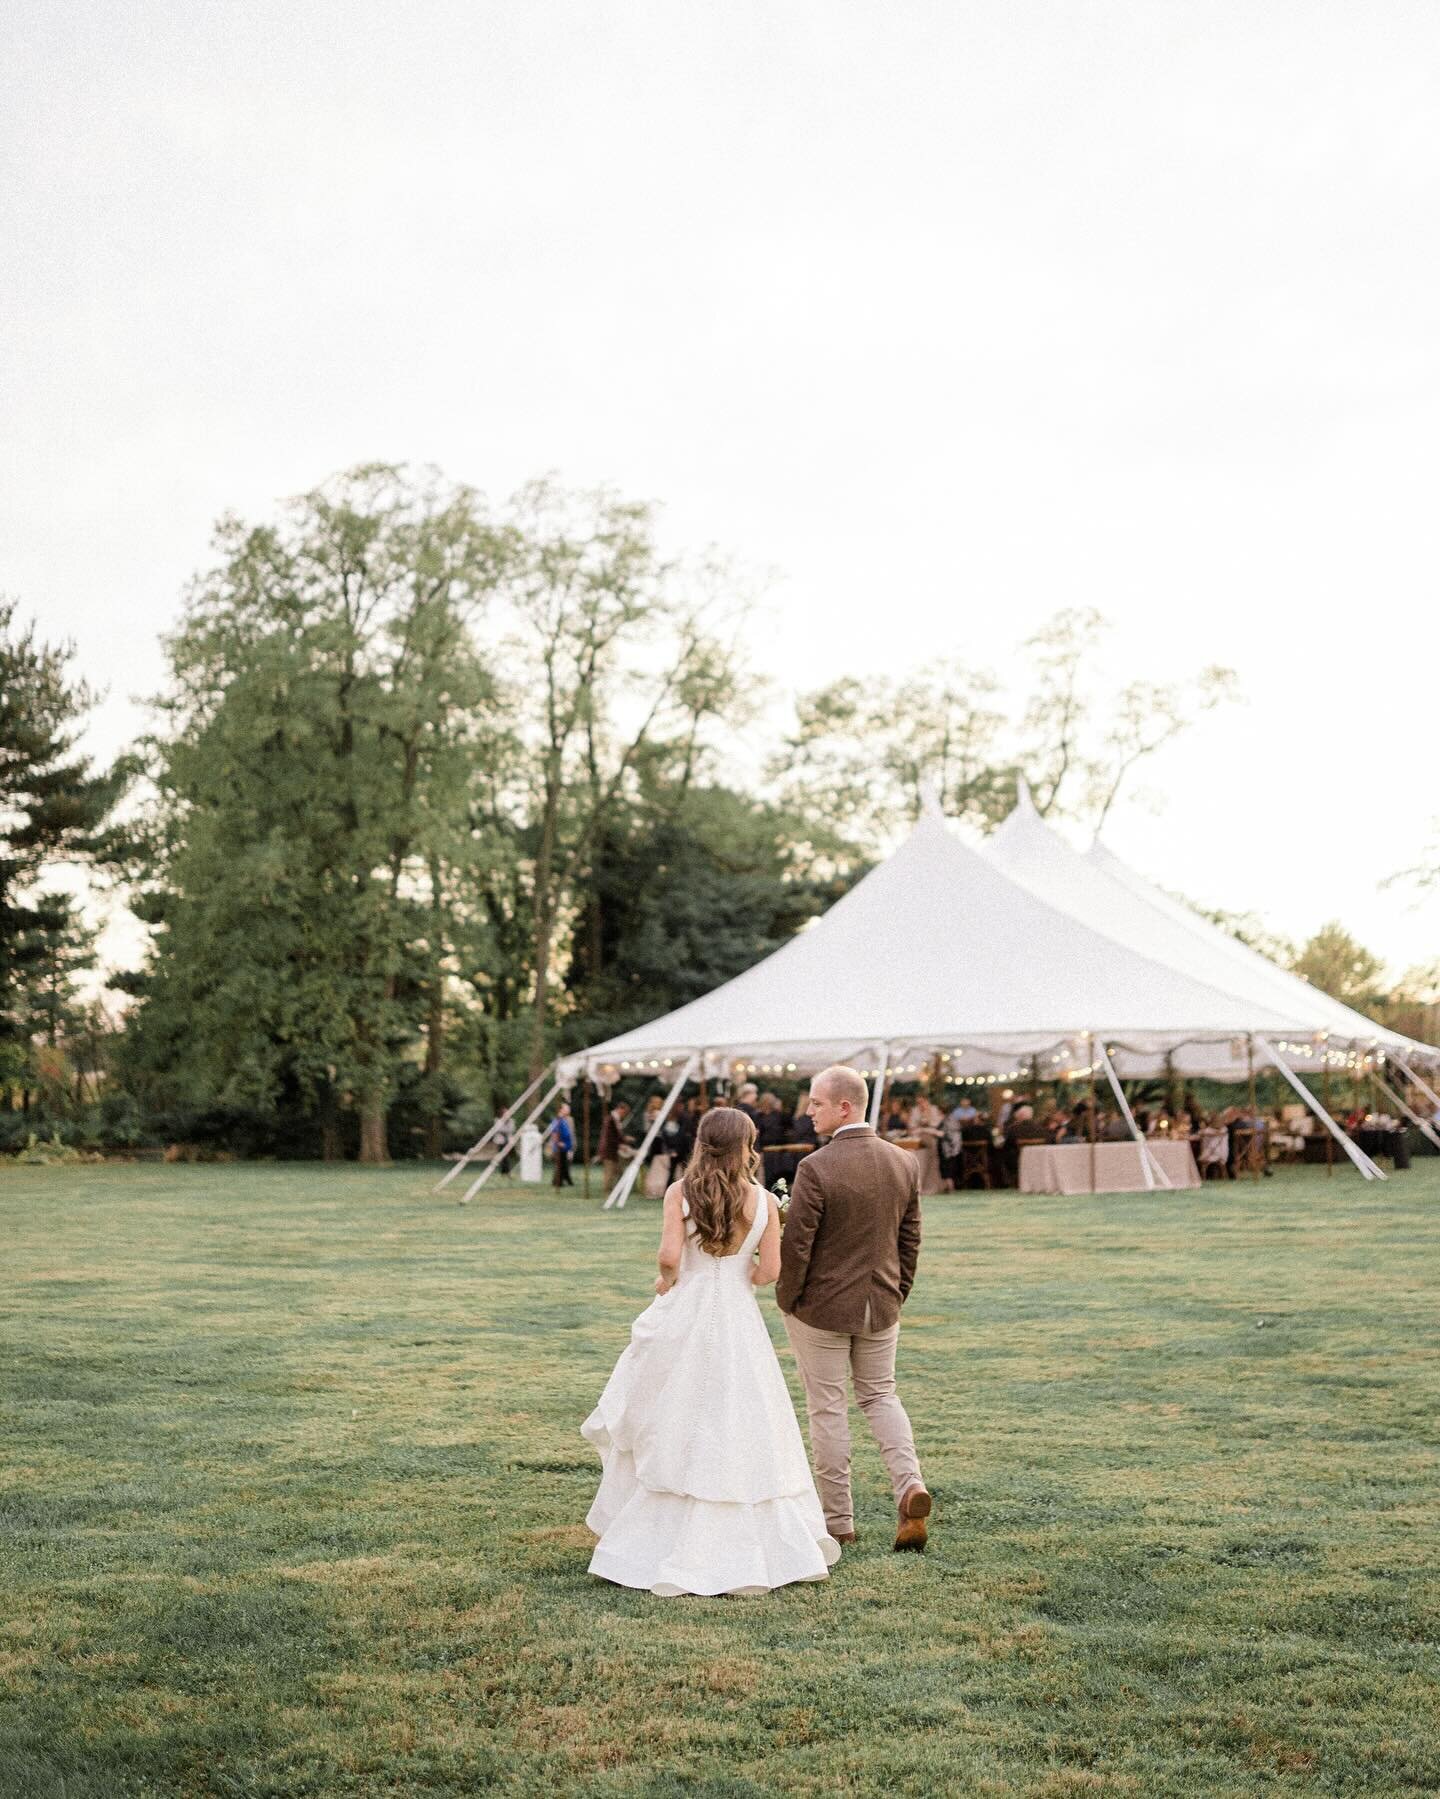 A day I will never be over for multiple reasons 

1. I mean look at it. I&rsquo;m such a sucker for a warm fall wedding day. 
2. It&rsquo;s a day I associate shot for @courtneydueppengiesser + where I met @poppi_company which ultimately brought us @t